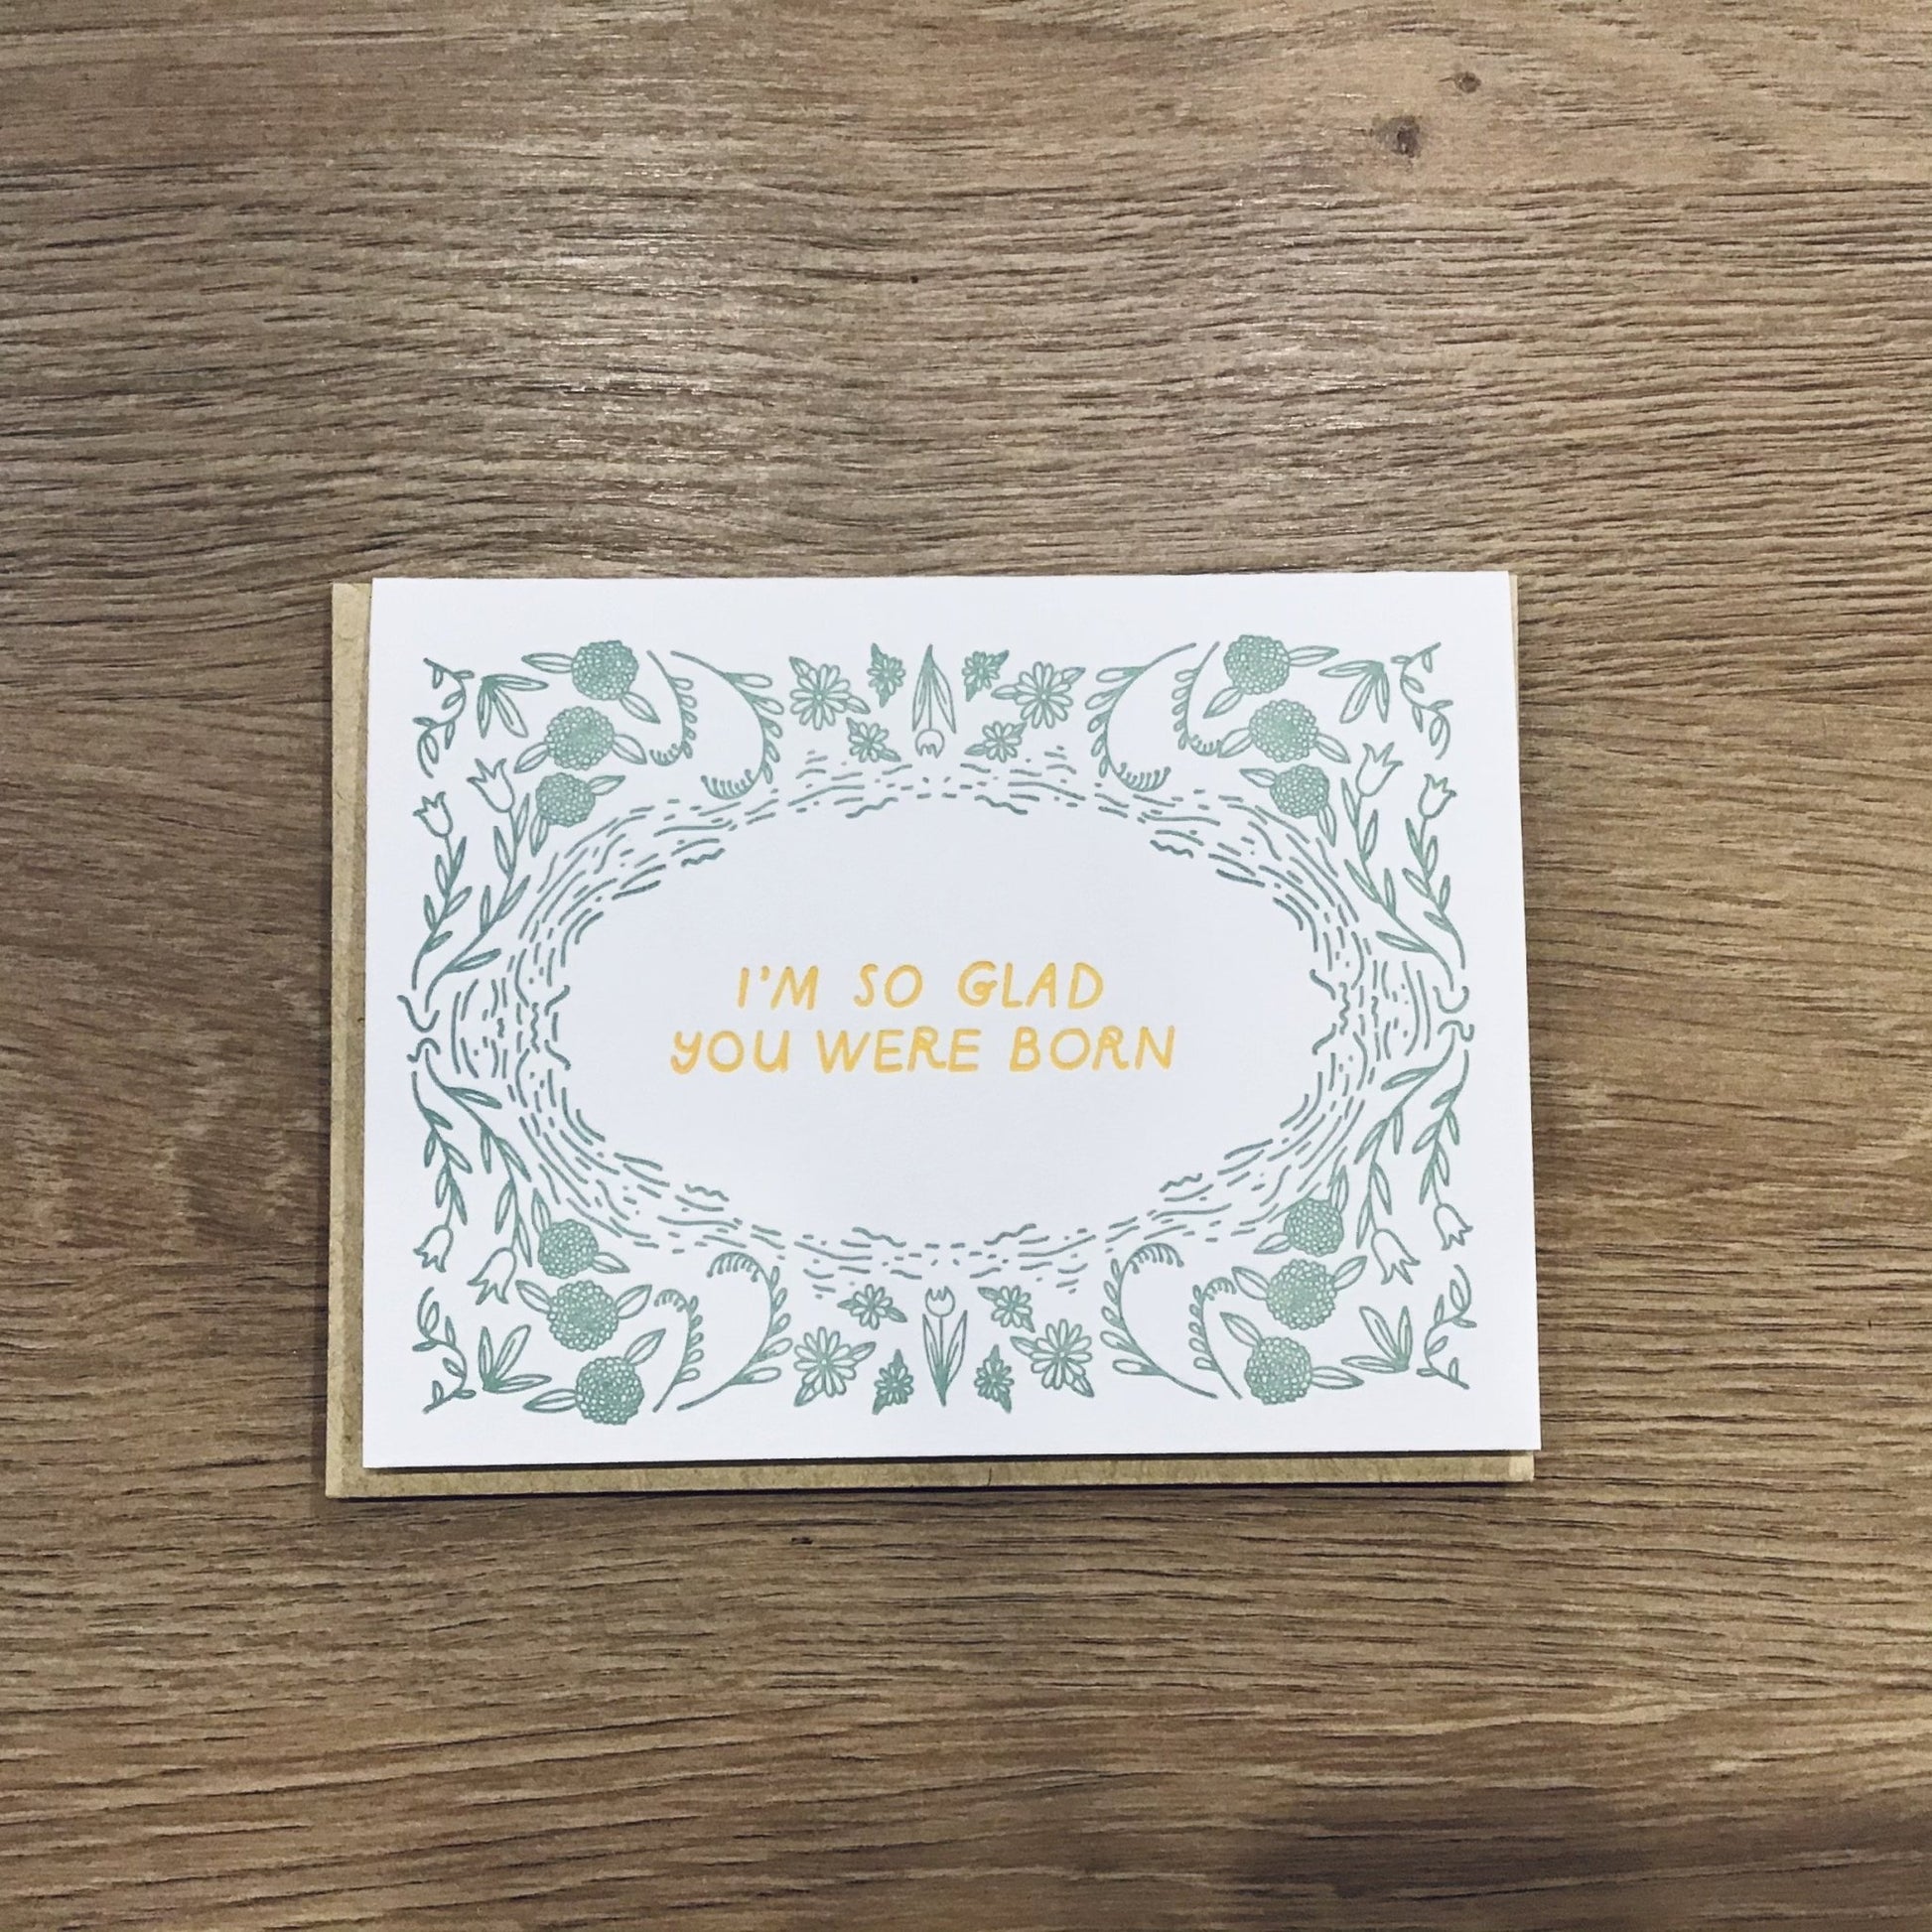 So Glad You Were Born Card - Ratbee Press -Freehand Market